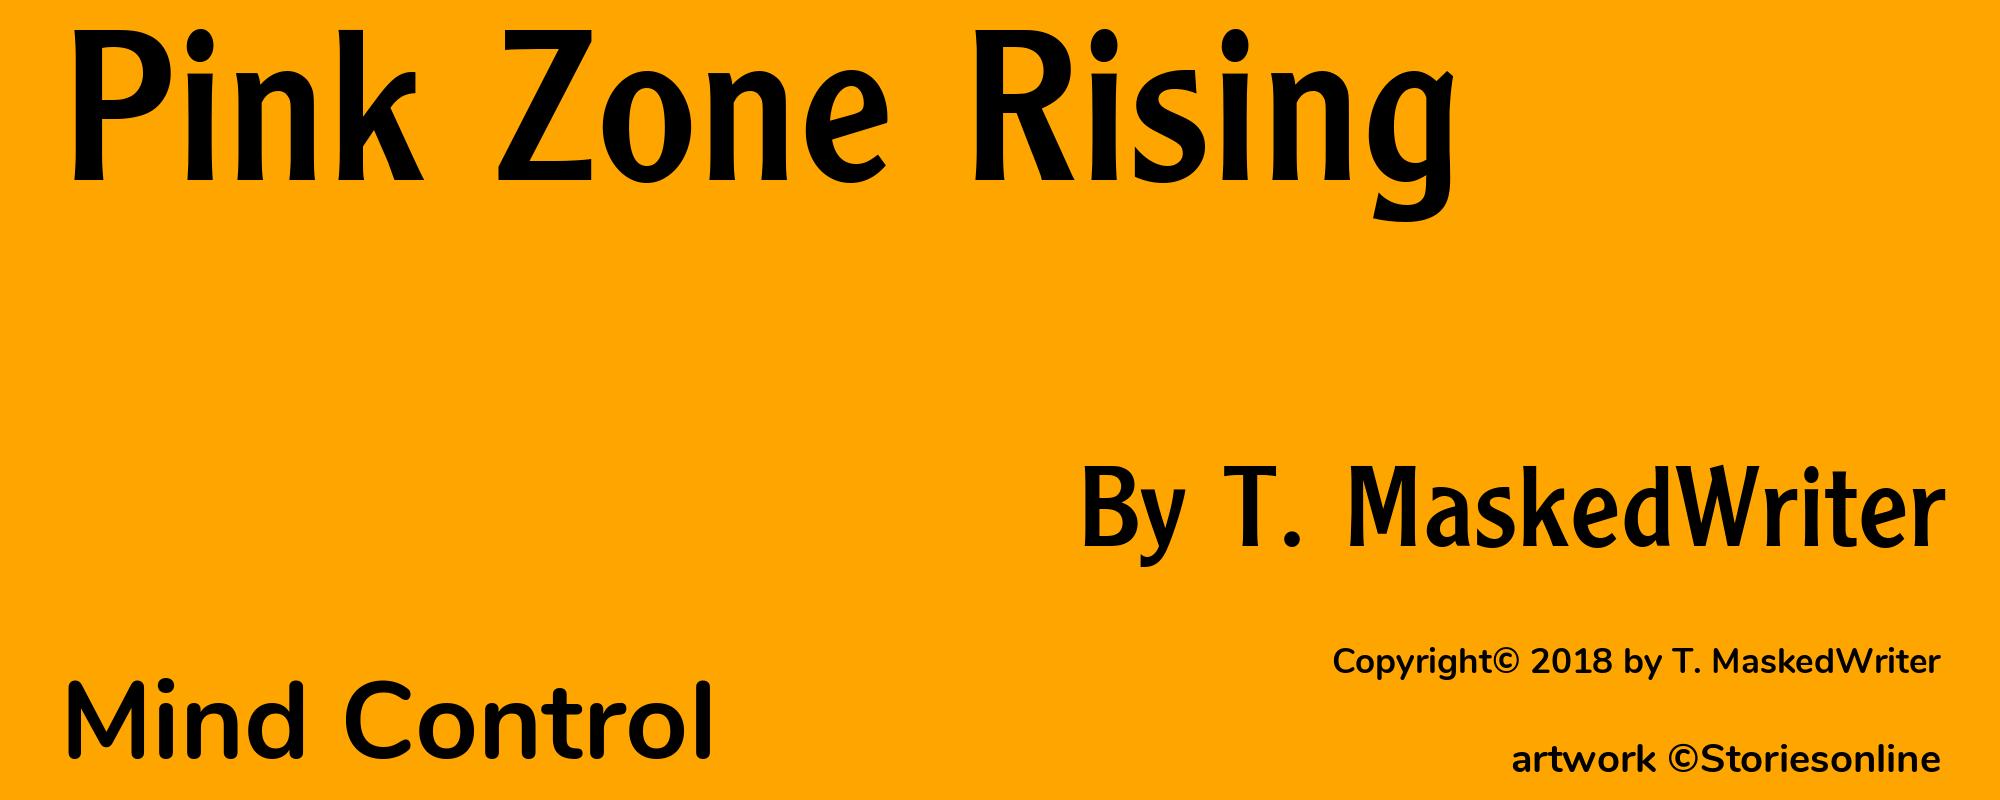 Pink Zone Rising - Cover